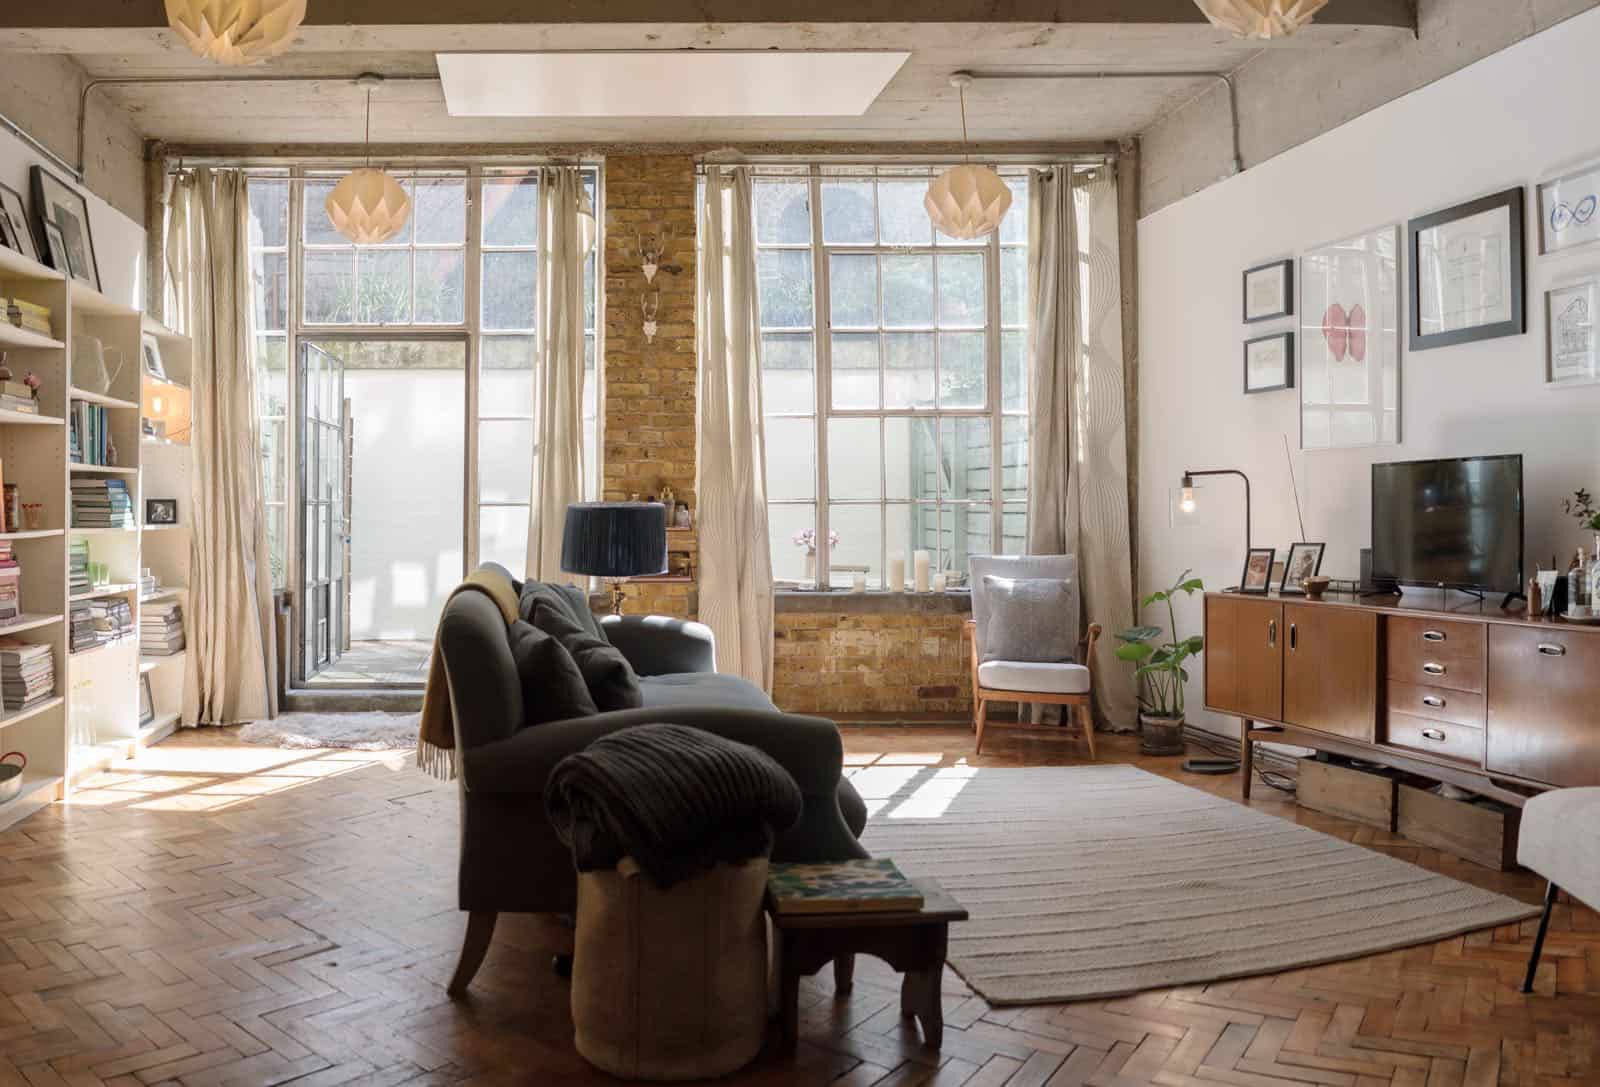 London Fields E9 - An attractive apartment in a former shoe factory with industrial features - The Location Guys